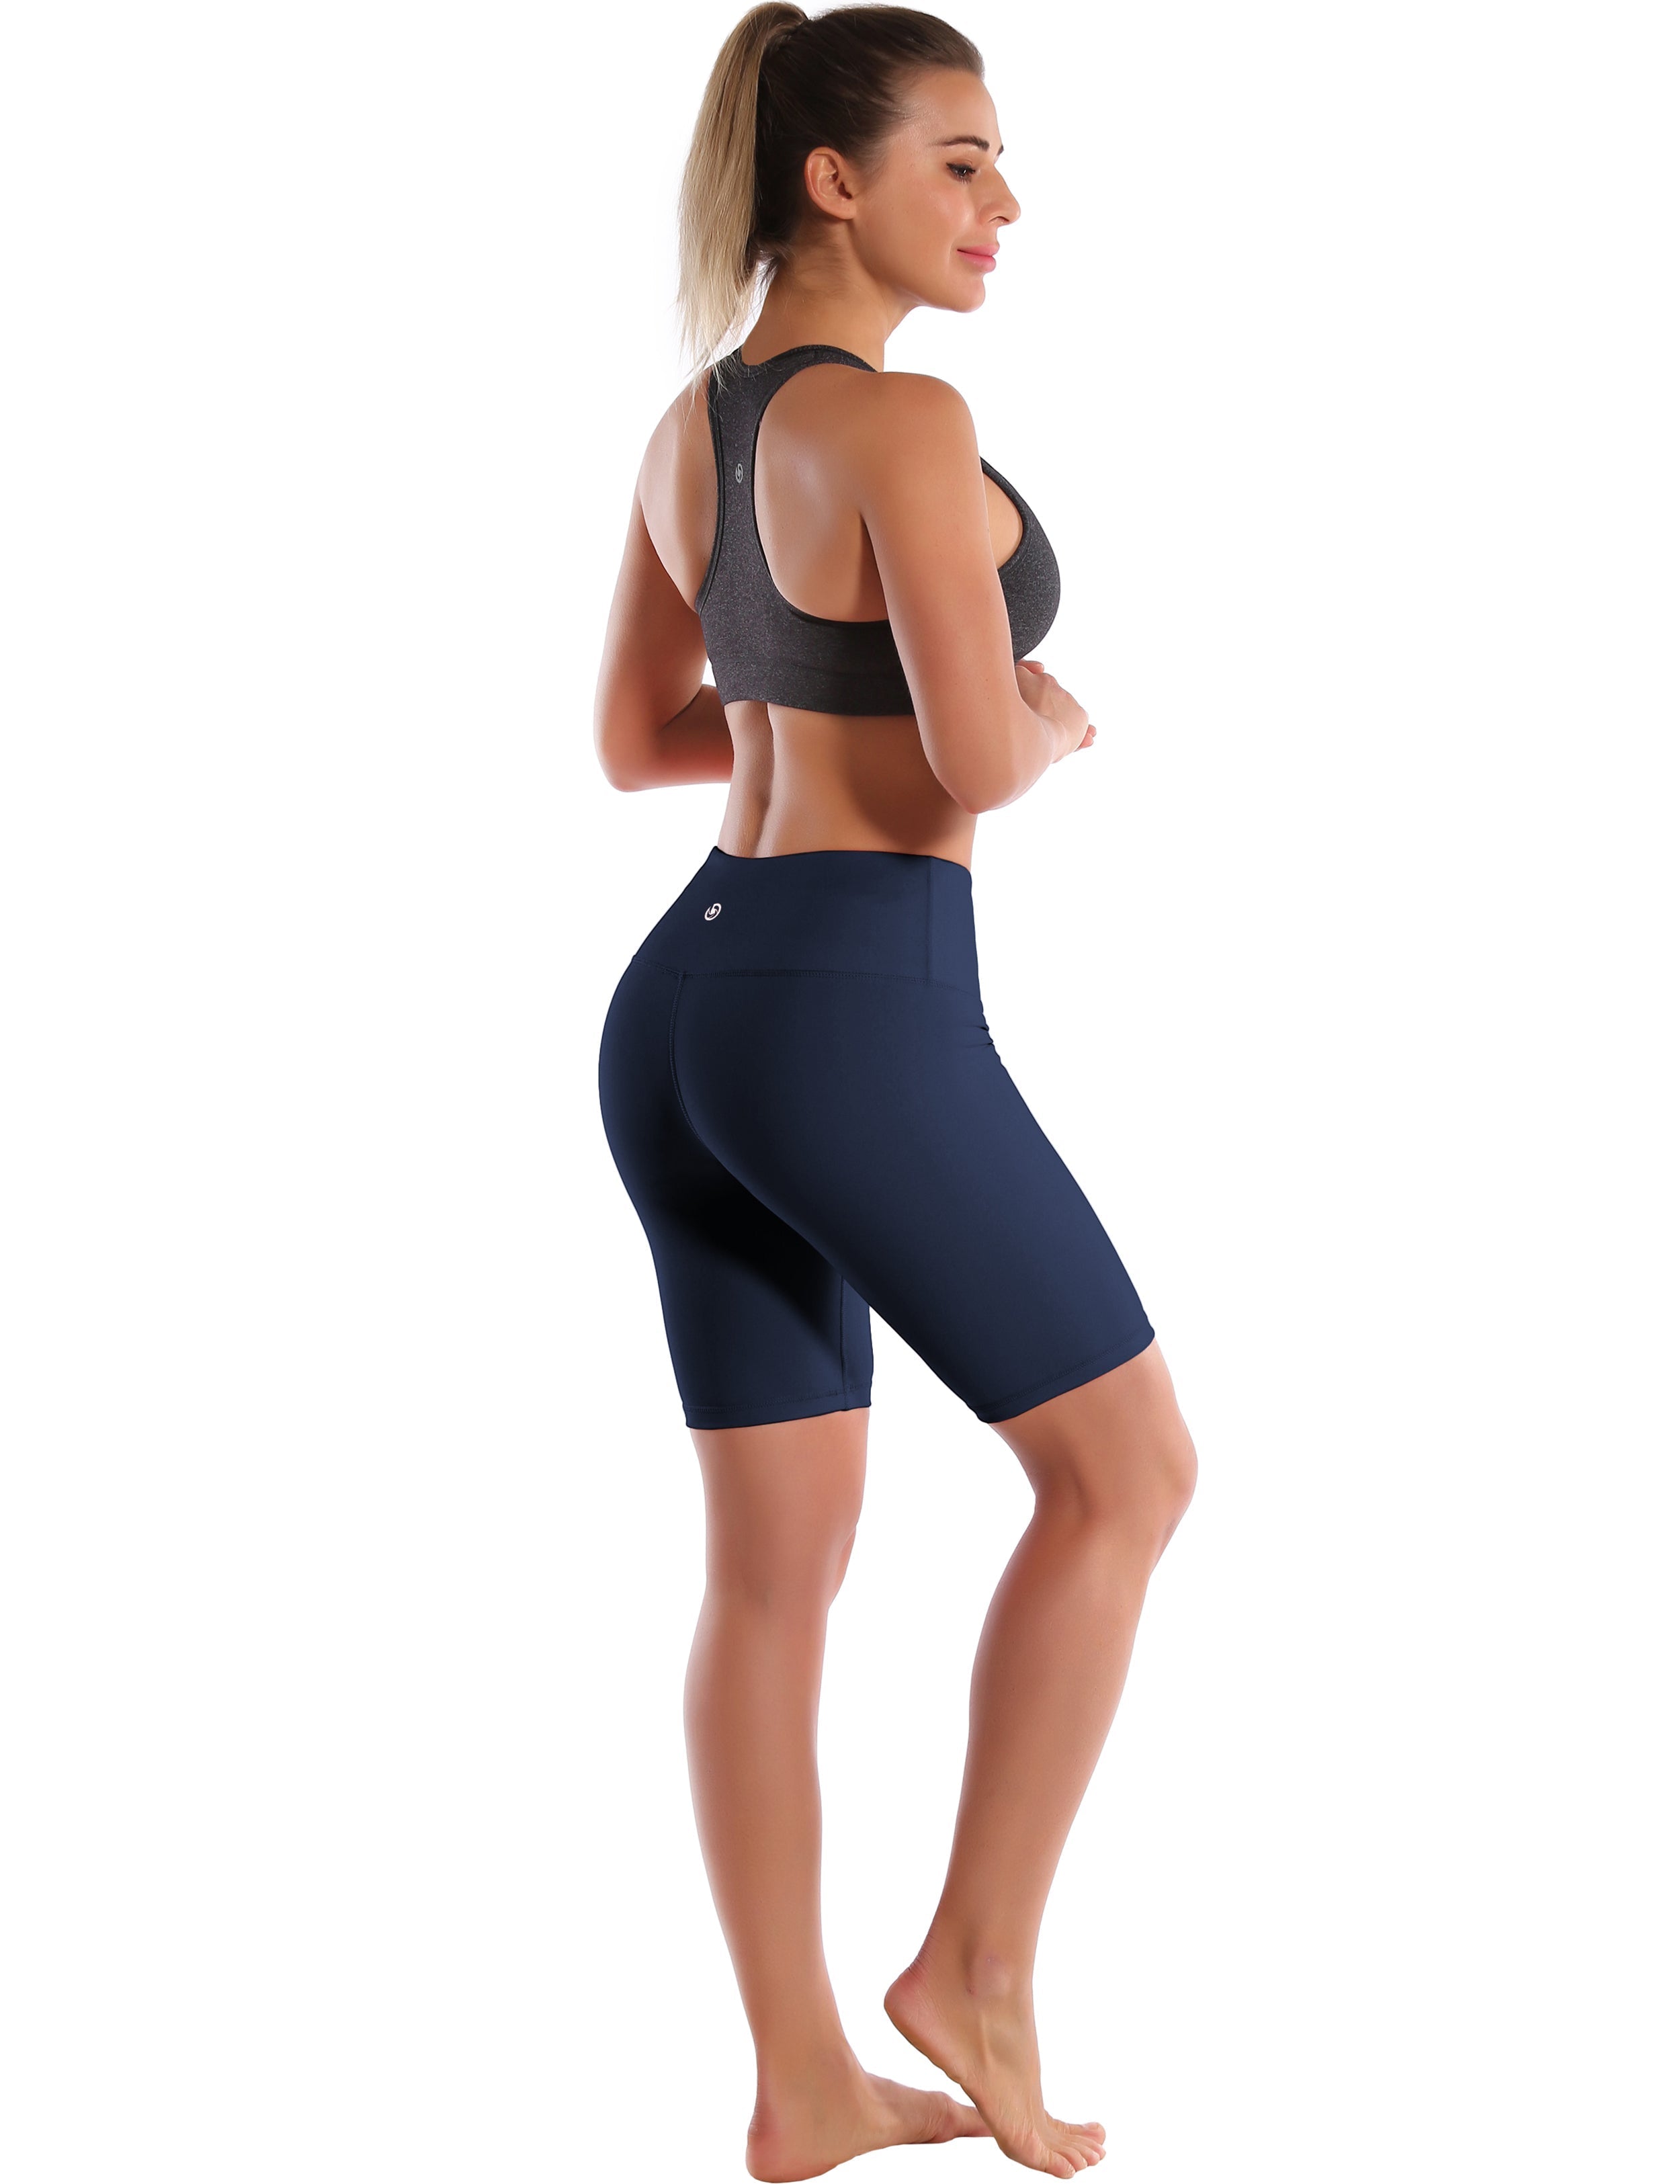 8" High Waist yogastudio Shorts darknavy Sleek, soft, smooth and totally comfortable: our newest style is here. Softest-ever fabric High elasticity High density 4-way stretch Fabric doesn't attract lint easily No see-through Moisture-wicking Machine wash 75% Nylon, 25% Spandex